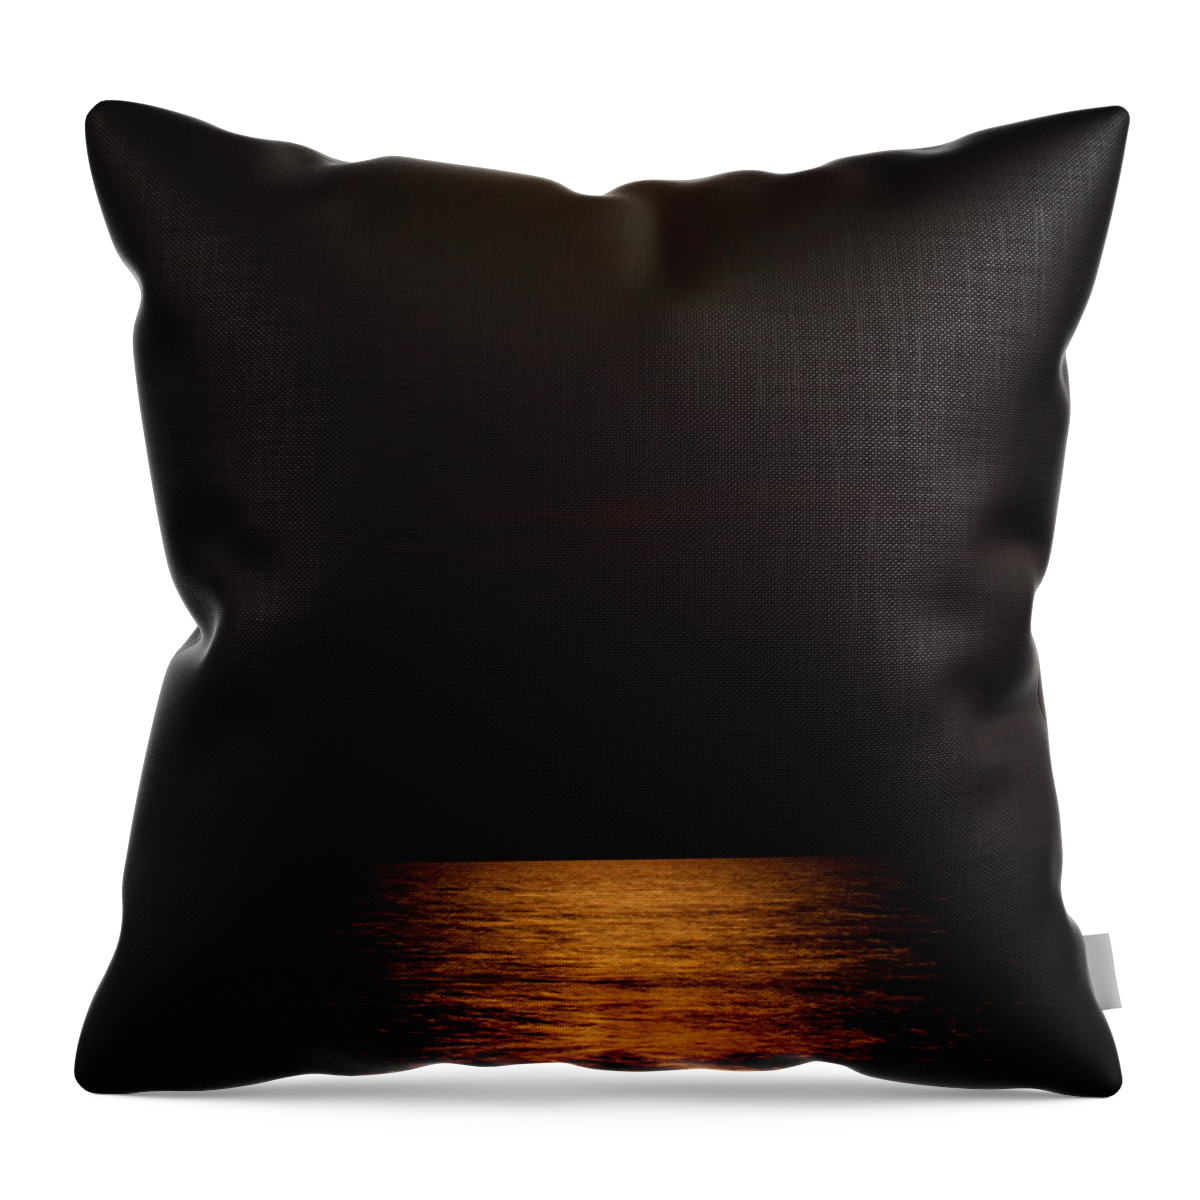 Moonrise Throw Pillow featuring the photograph Moonrise by Pat Moore